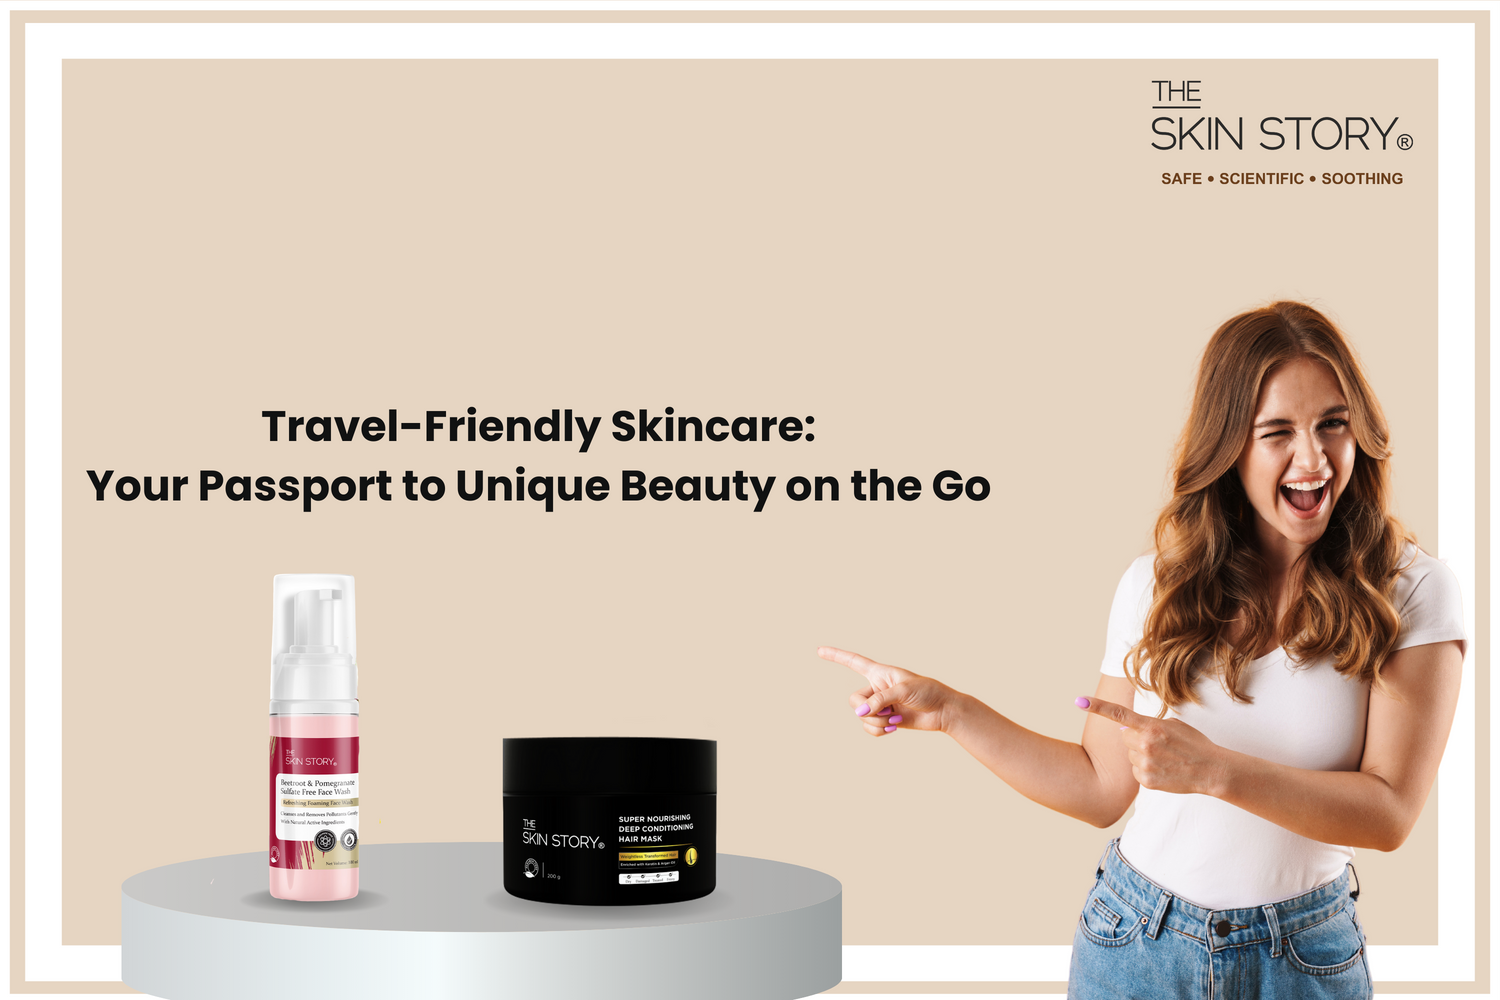 Travel-Friendly Skincare: Your Passport to Unique Beauty on the Go